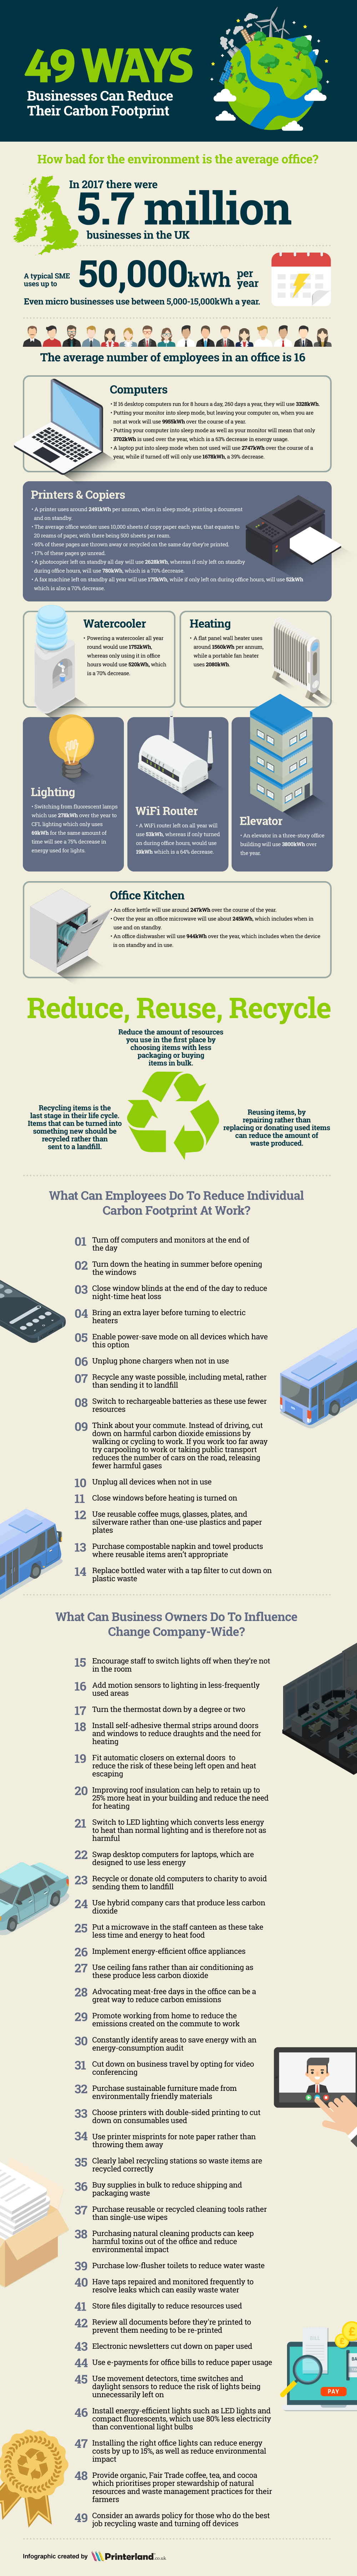 49 ways businesses can reduce their carbon footprint infographic